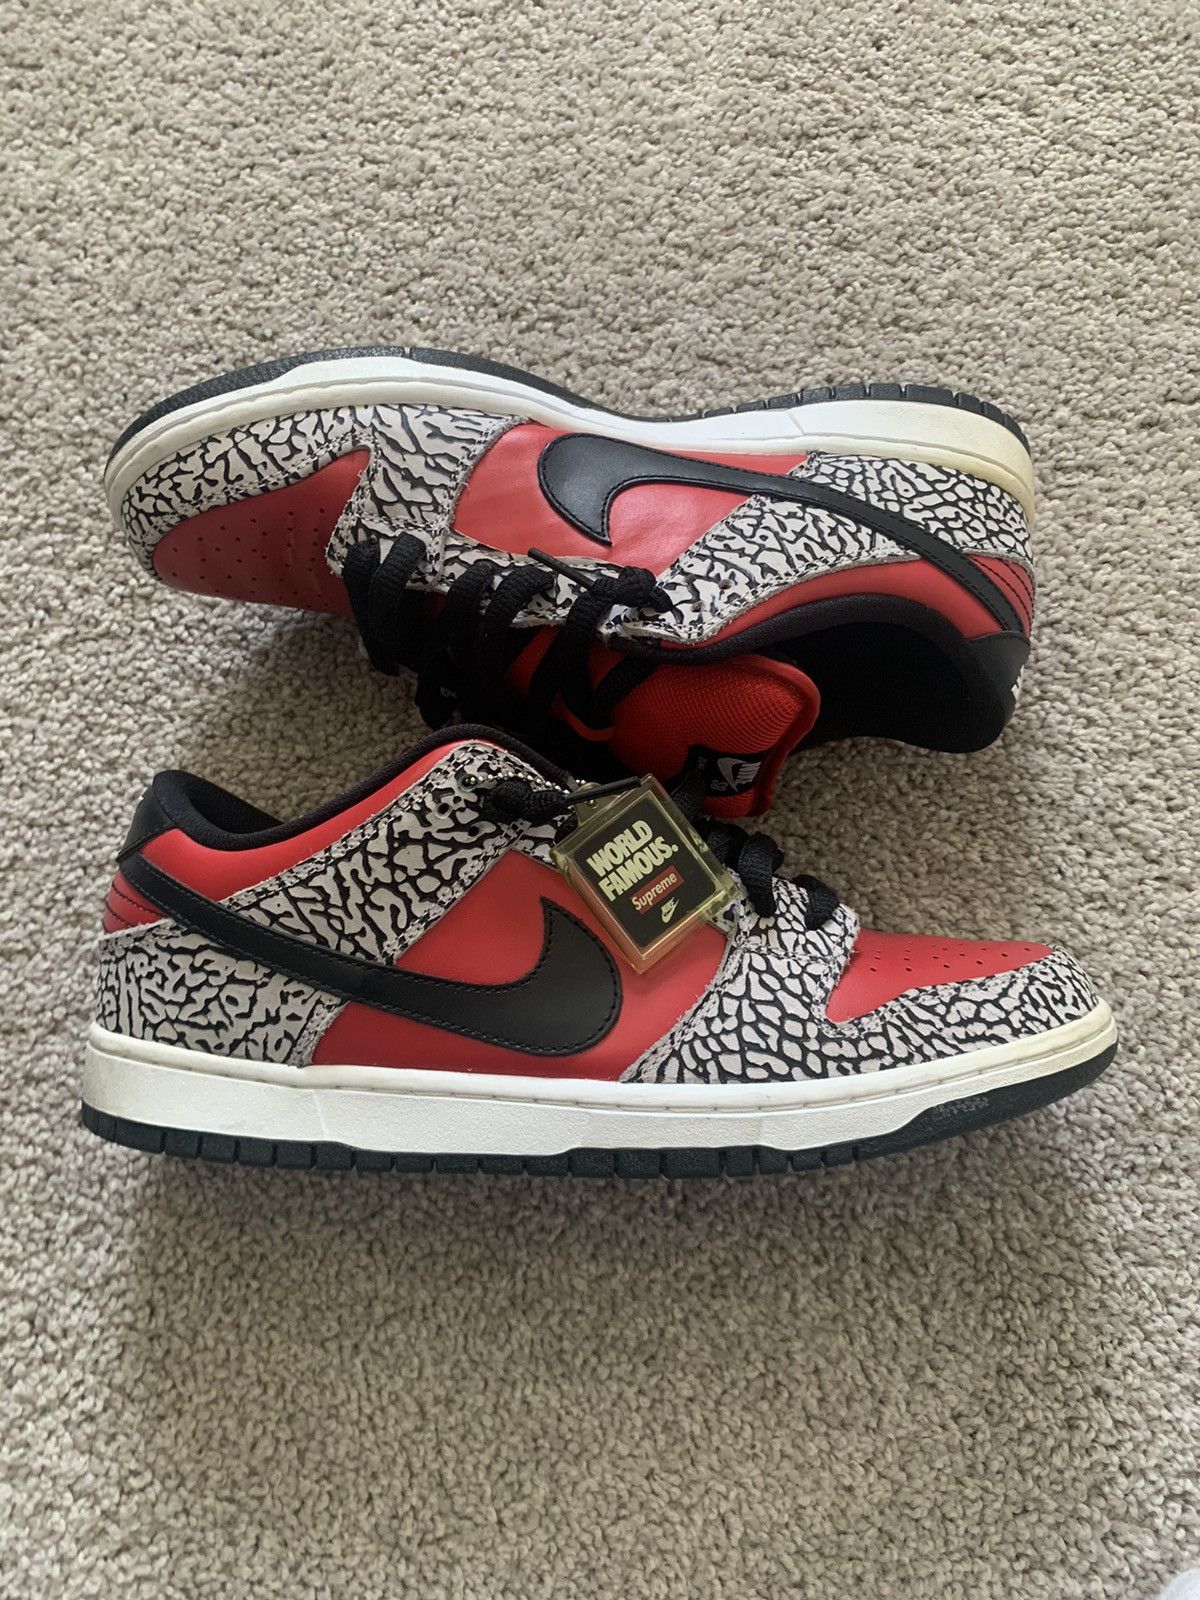 Nike Supreme X Dunk Low Premium Sb Red Cement | Grailed